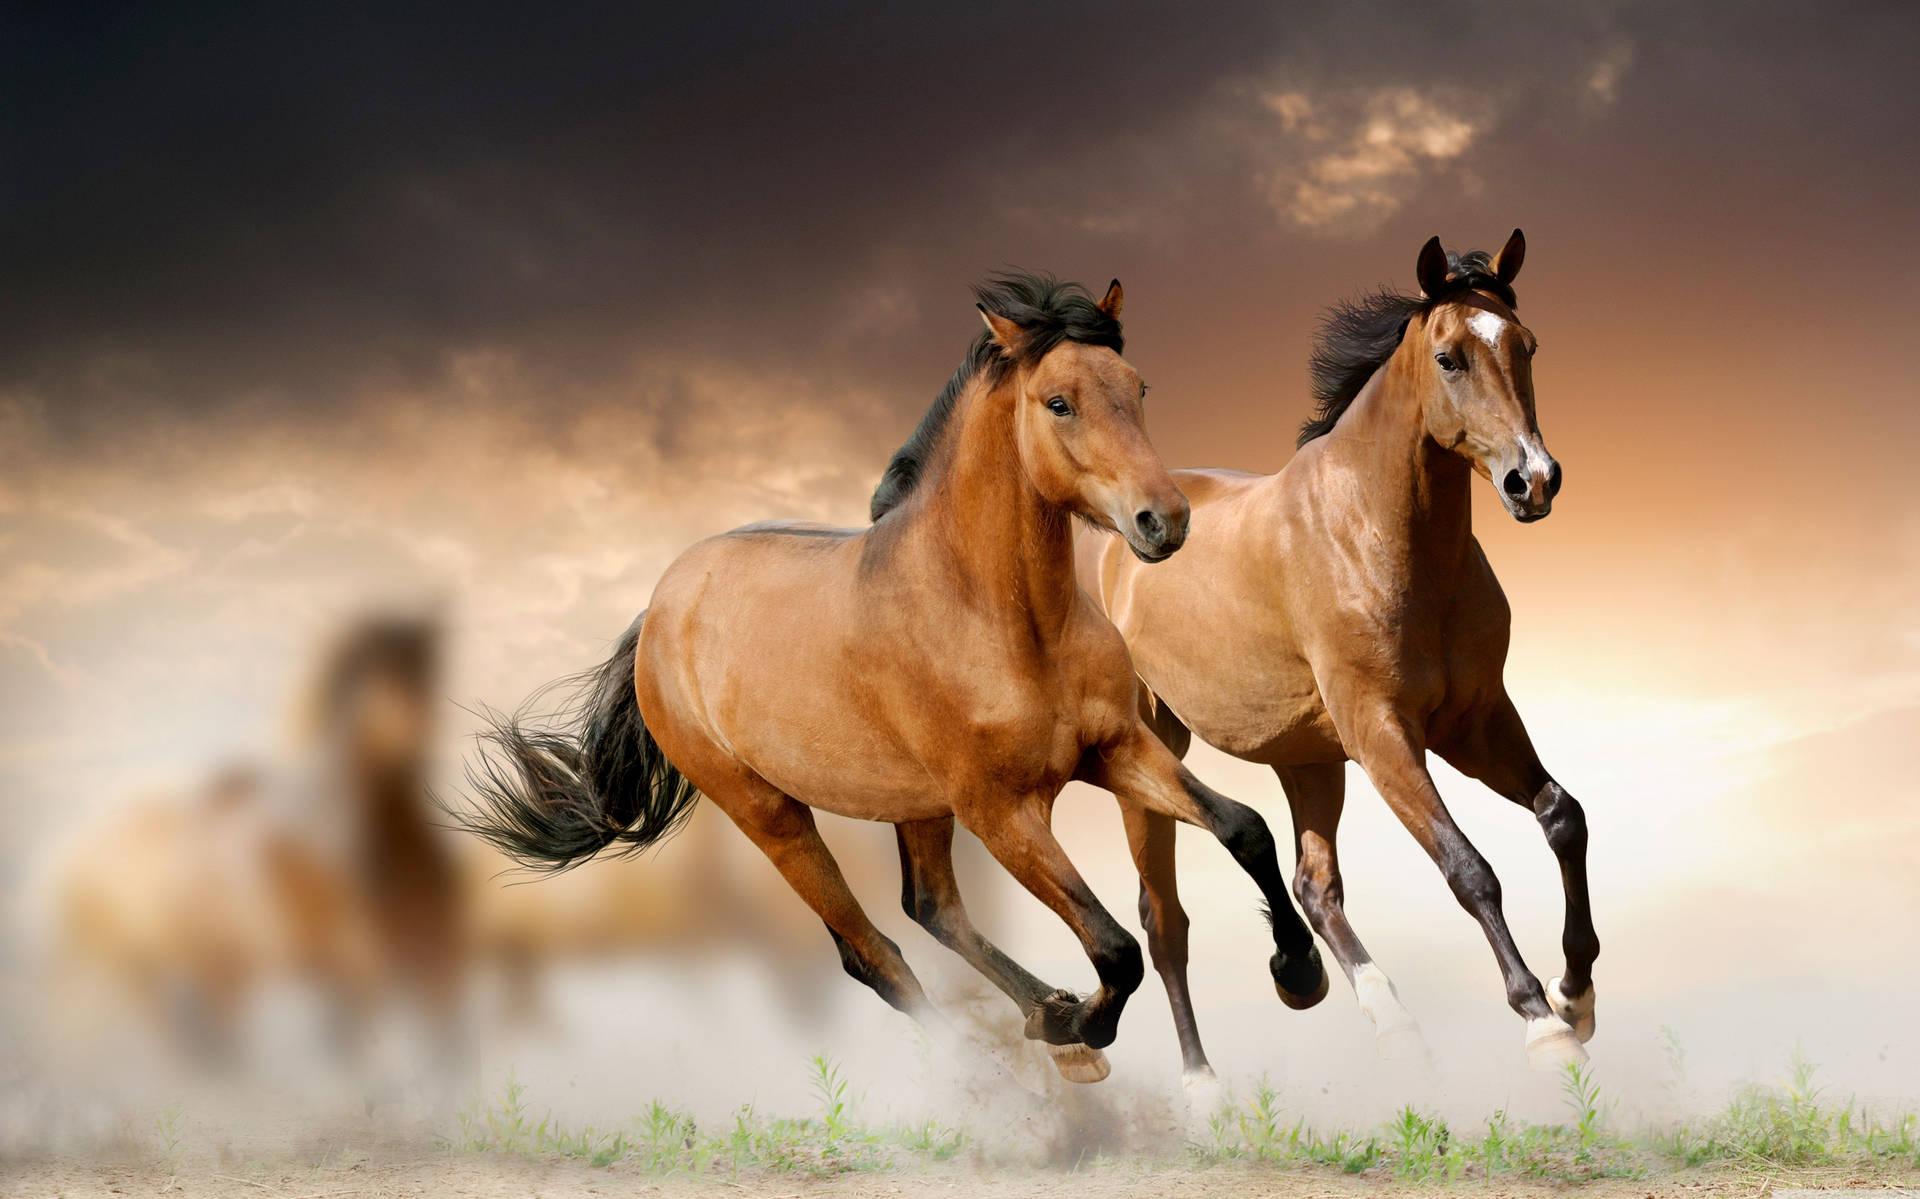 156 Horse Wallpapers Backgrounds For FREE